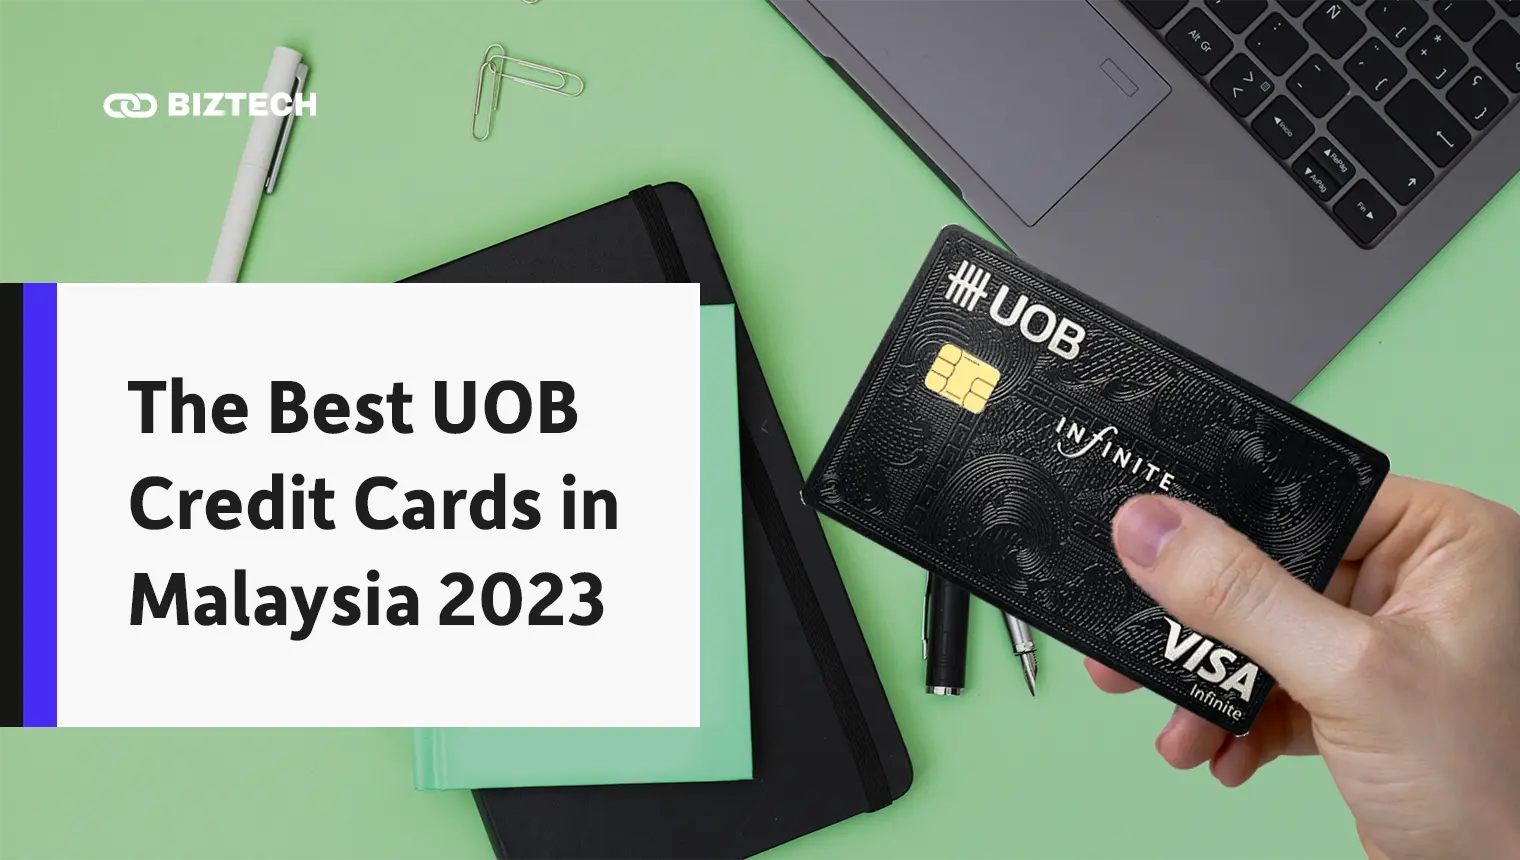 The Best UOB Credit Cards in Malaysia 2023